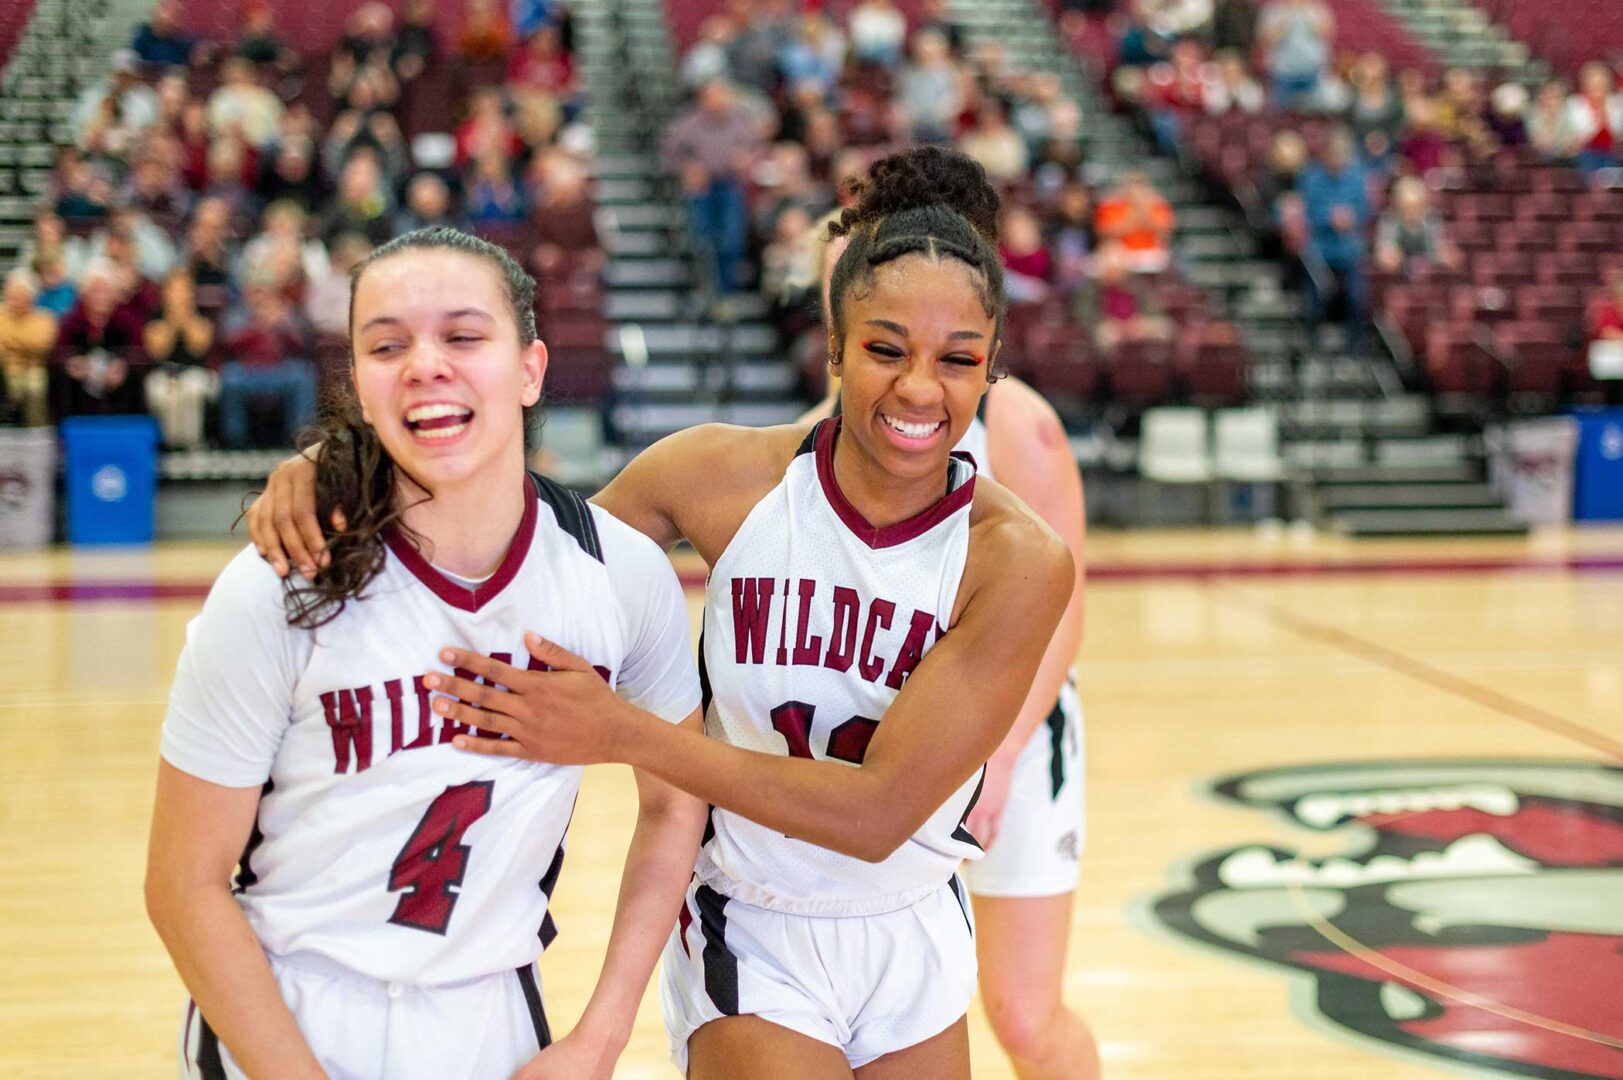 Chico State’s #4 Brandy Huffhines (left) and #12 Zhane Duckett (right) flash big smiles as they celebrate after the Wildcats’ victory over Cal State Dominguez Hills.